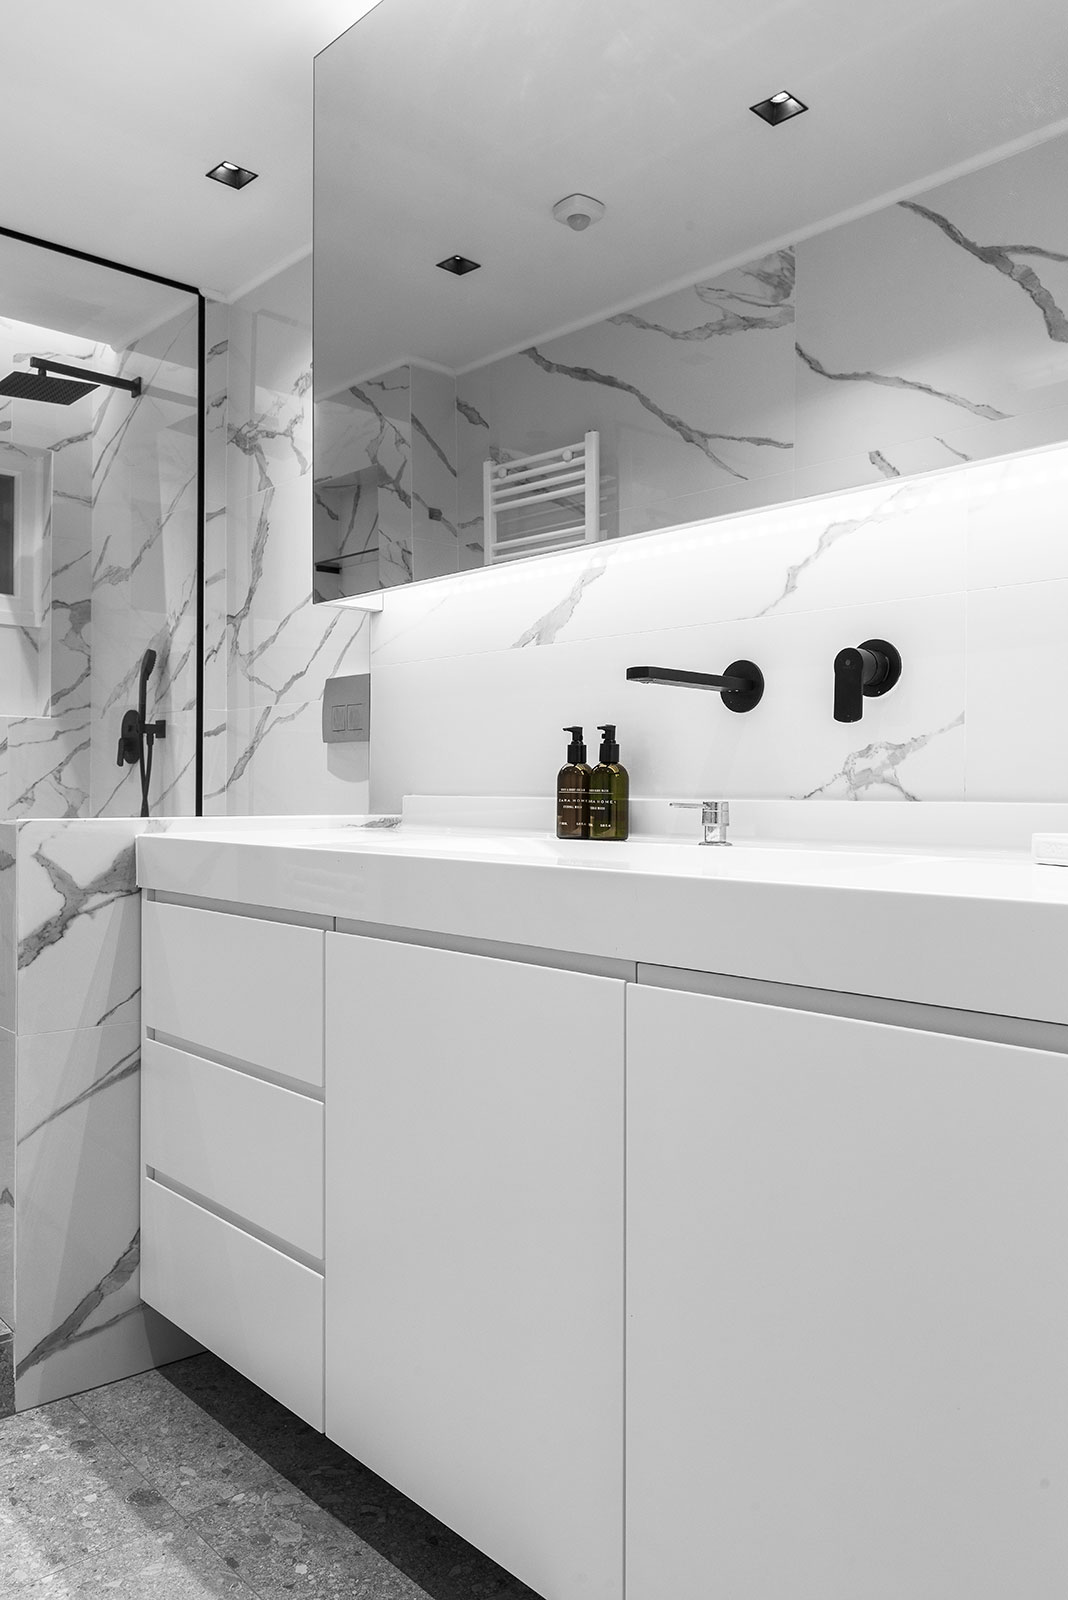 MK_HOUSE AIRBNB MODERN MARBLE BATHROOM tsquarearchitects.gr